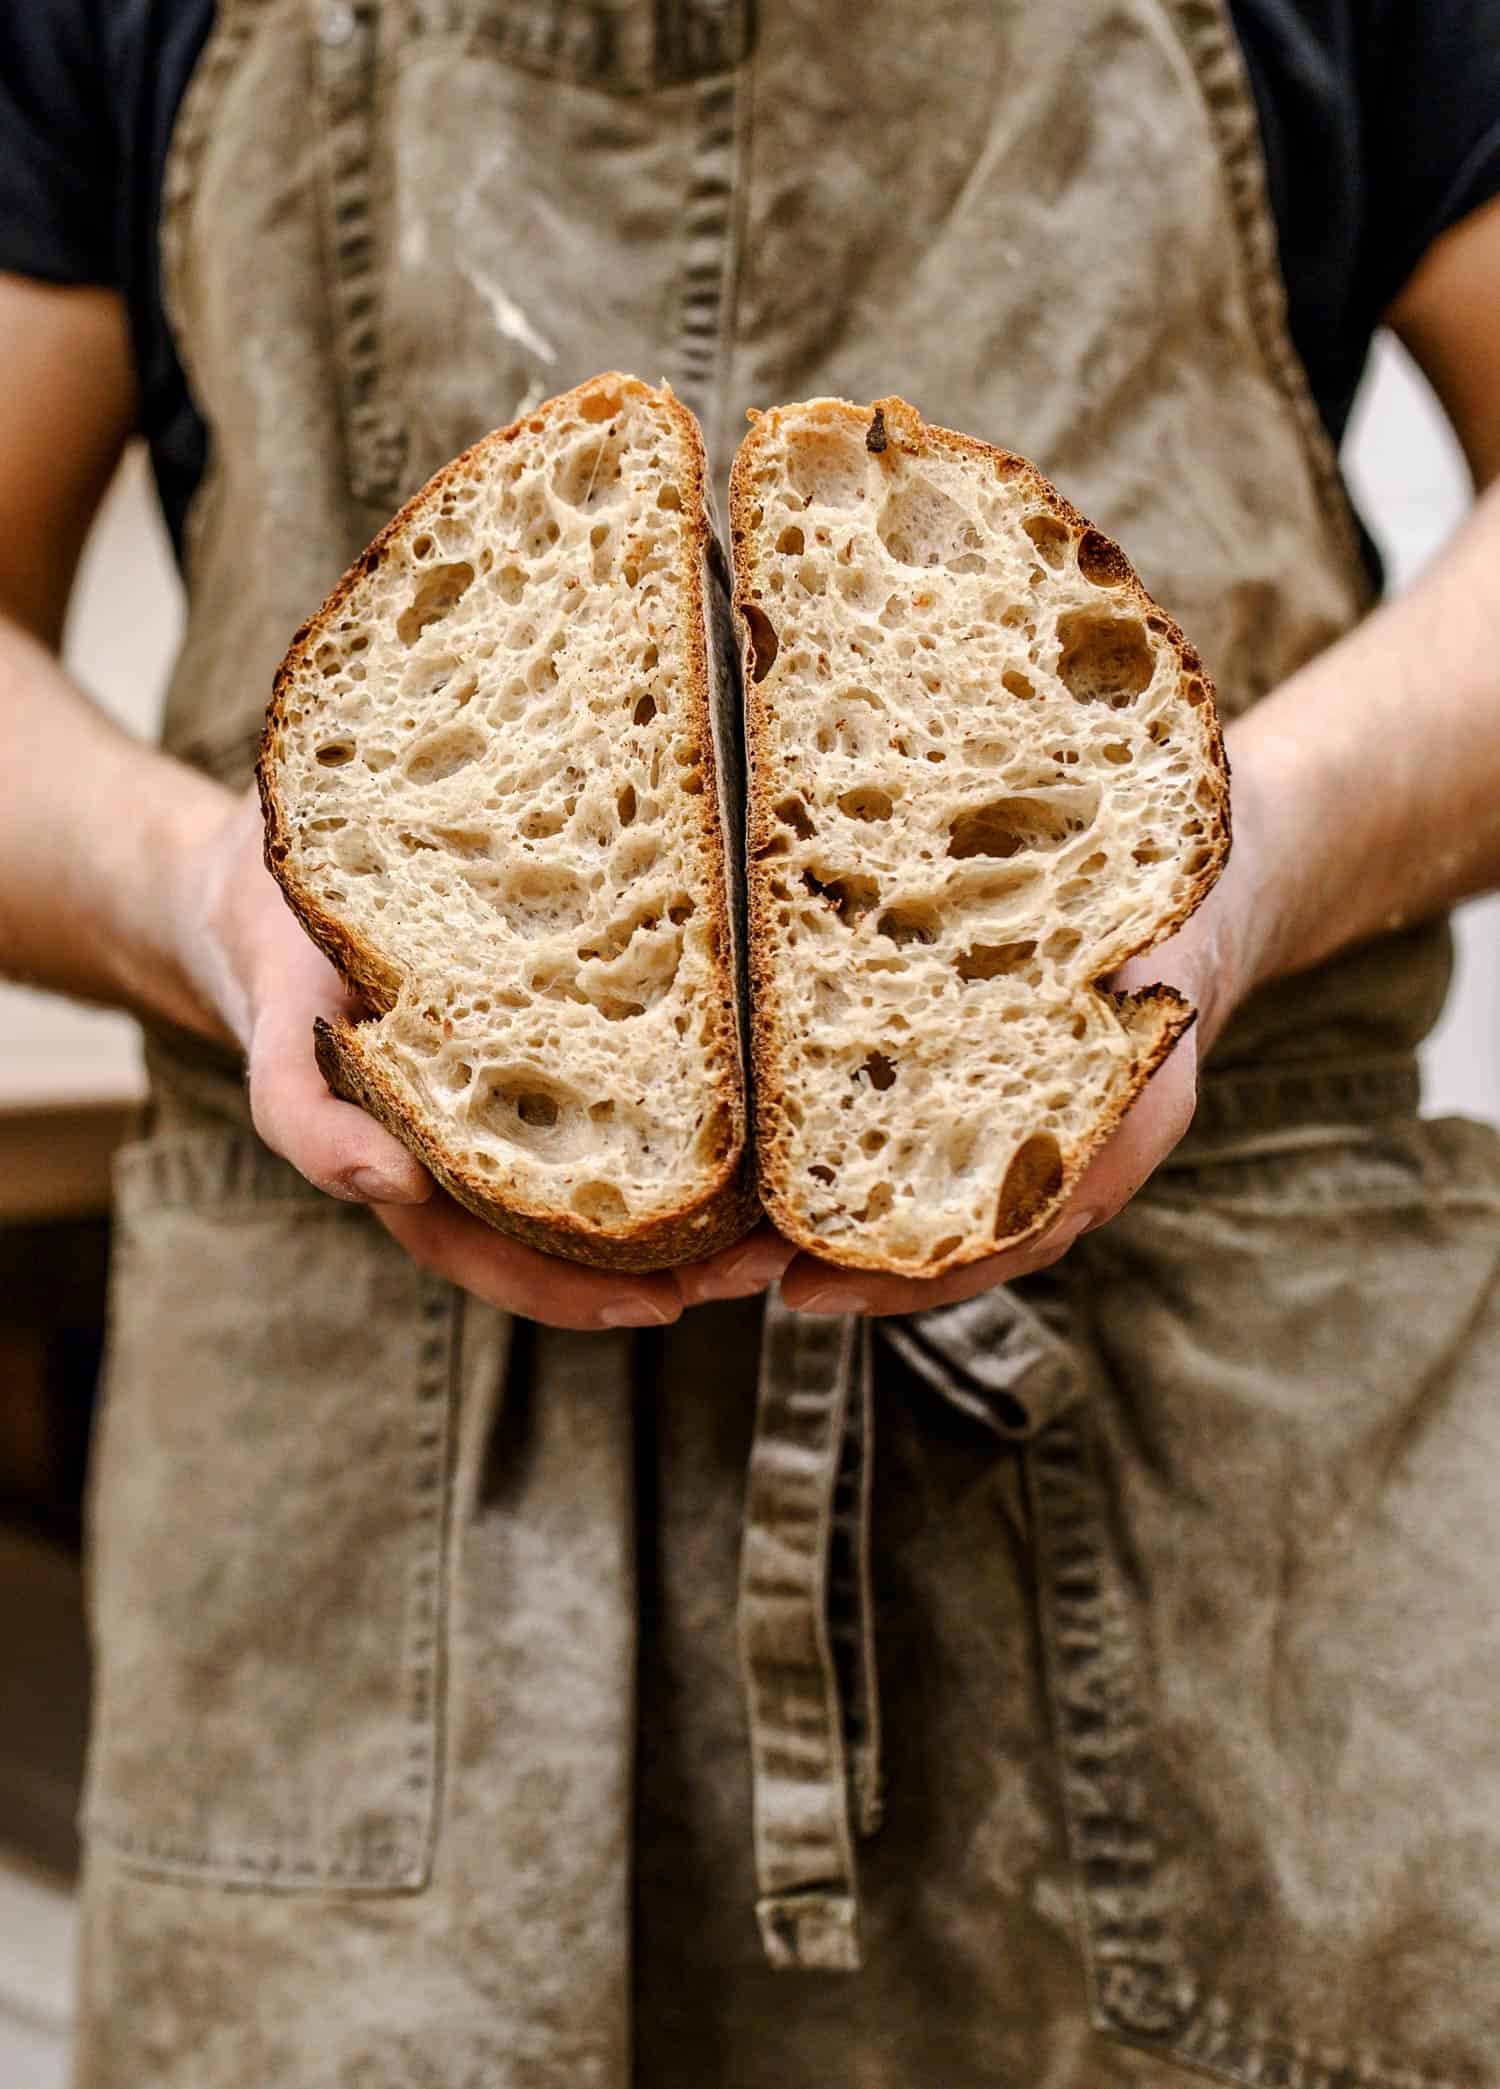 Baker holding a bread loaf cut open to reveal bubbles on the inside